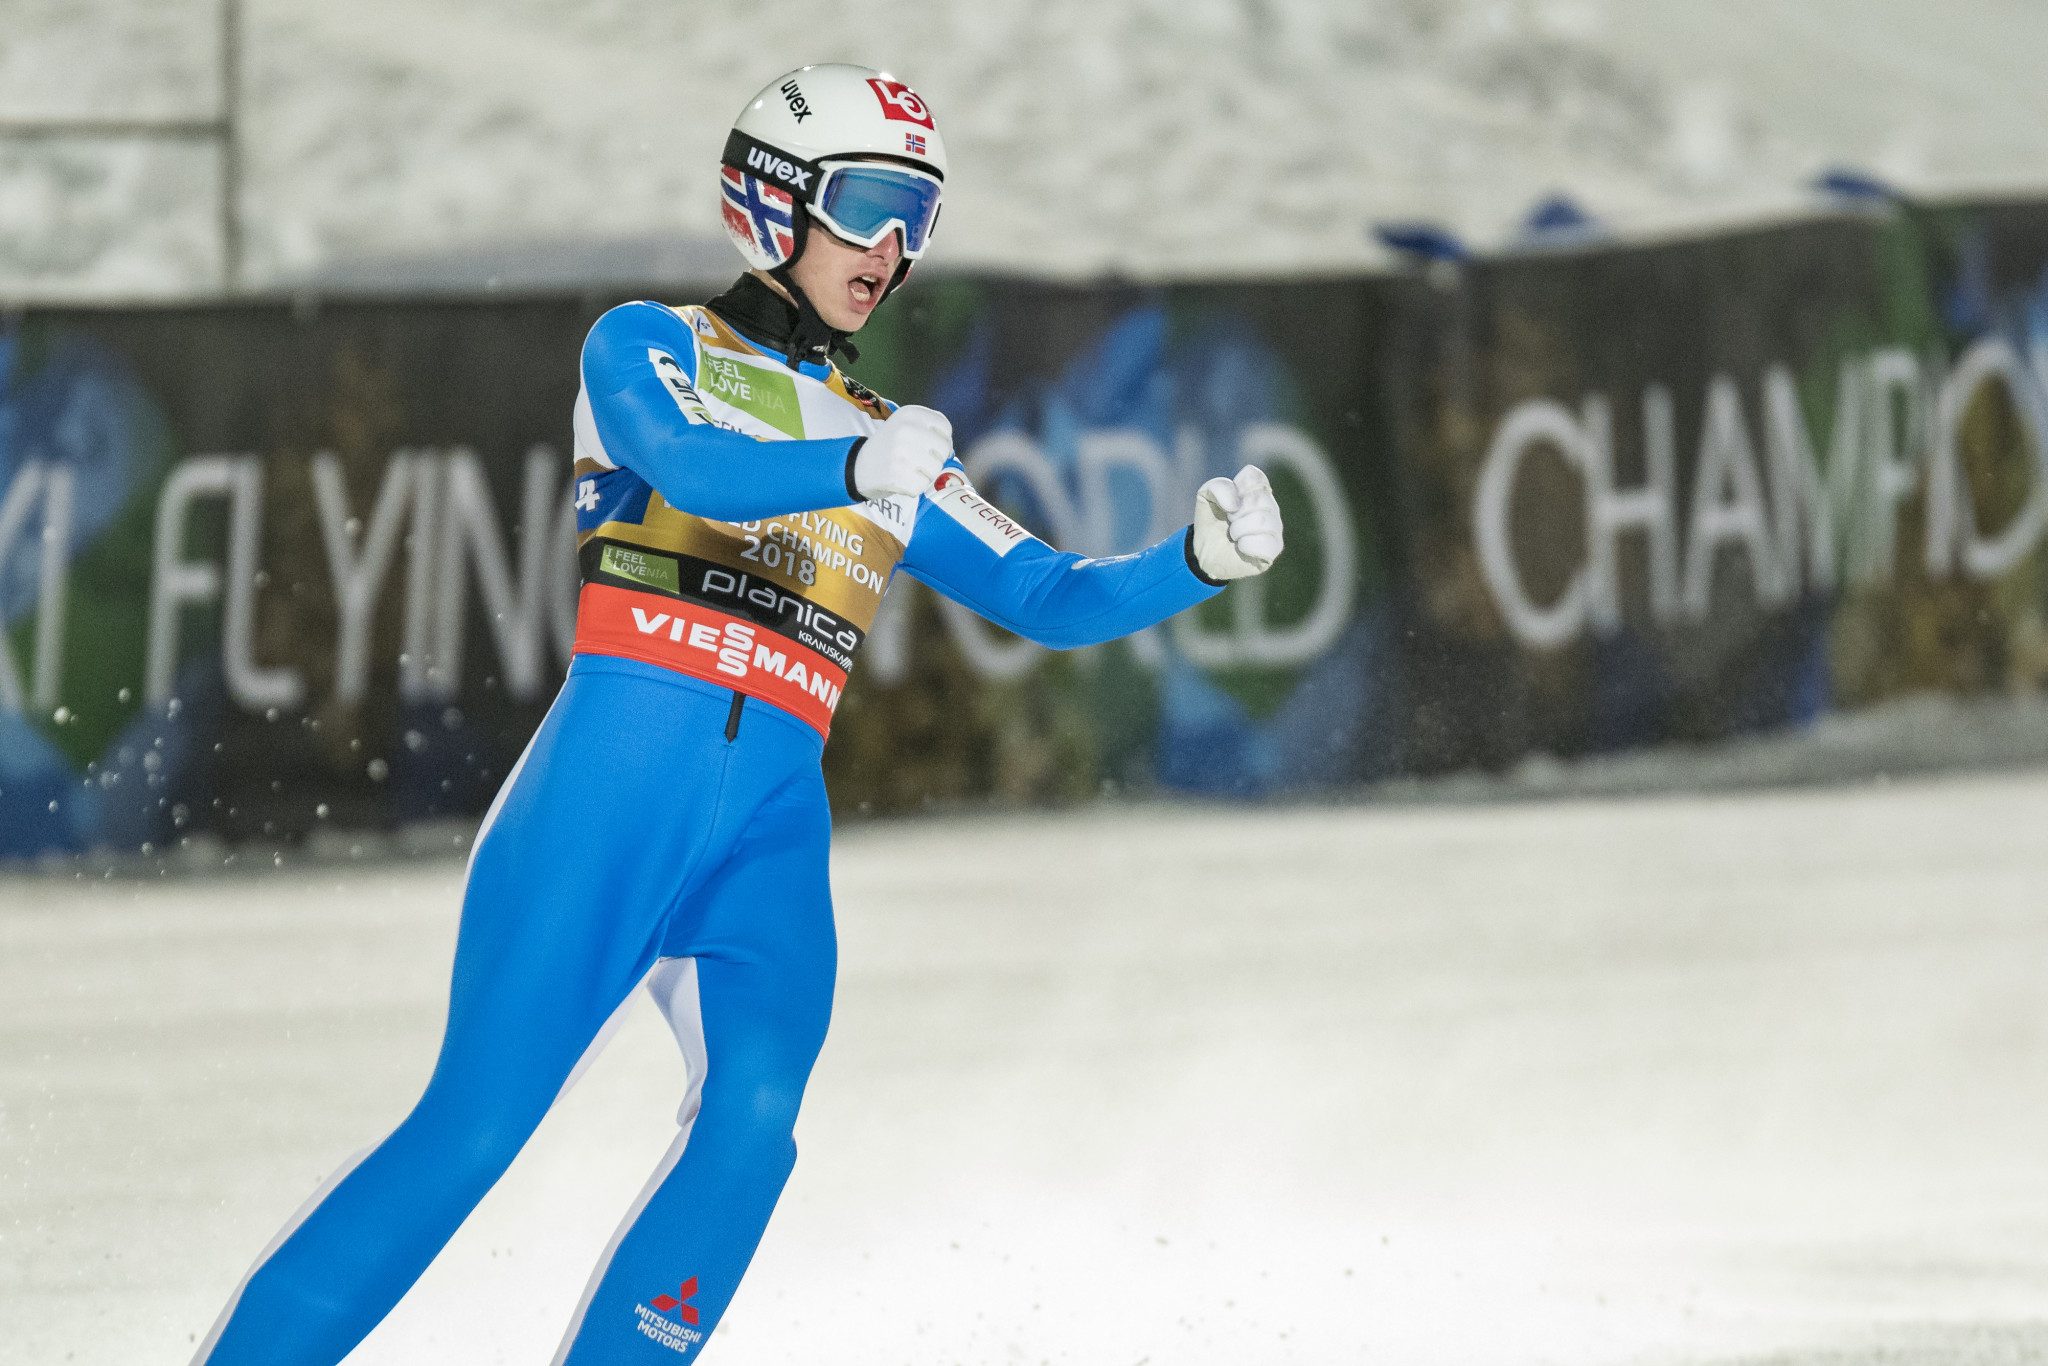 Granerud secures fourth straight Ski Jumping World Cup win in Engelberg